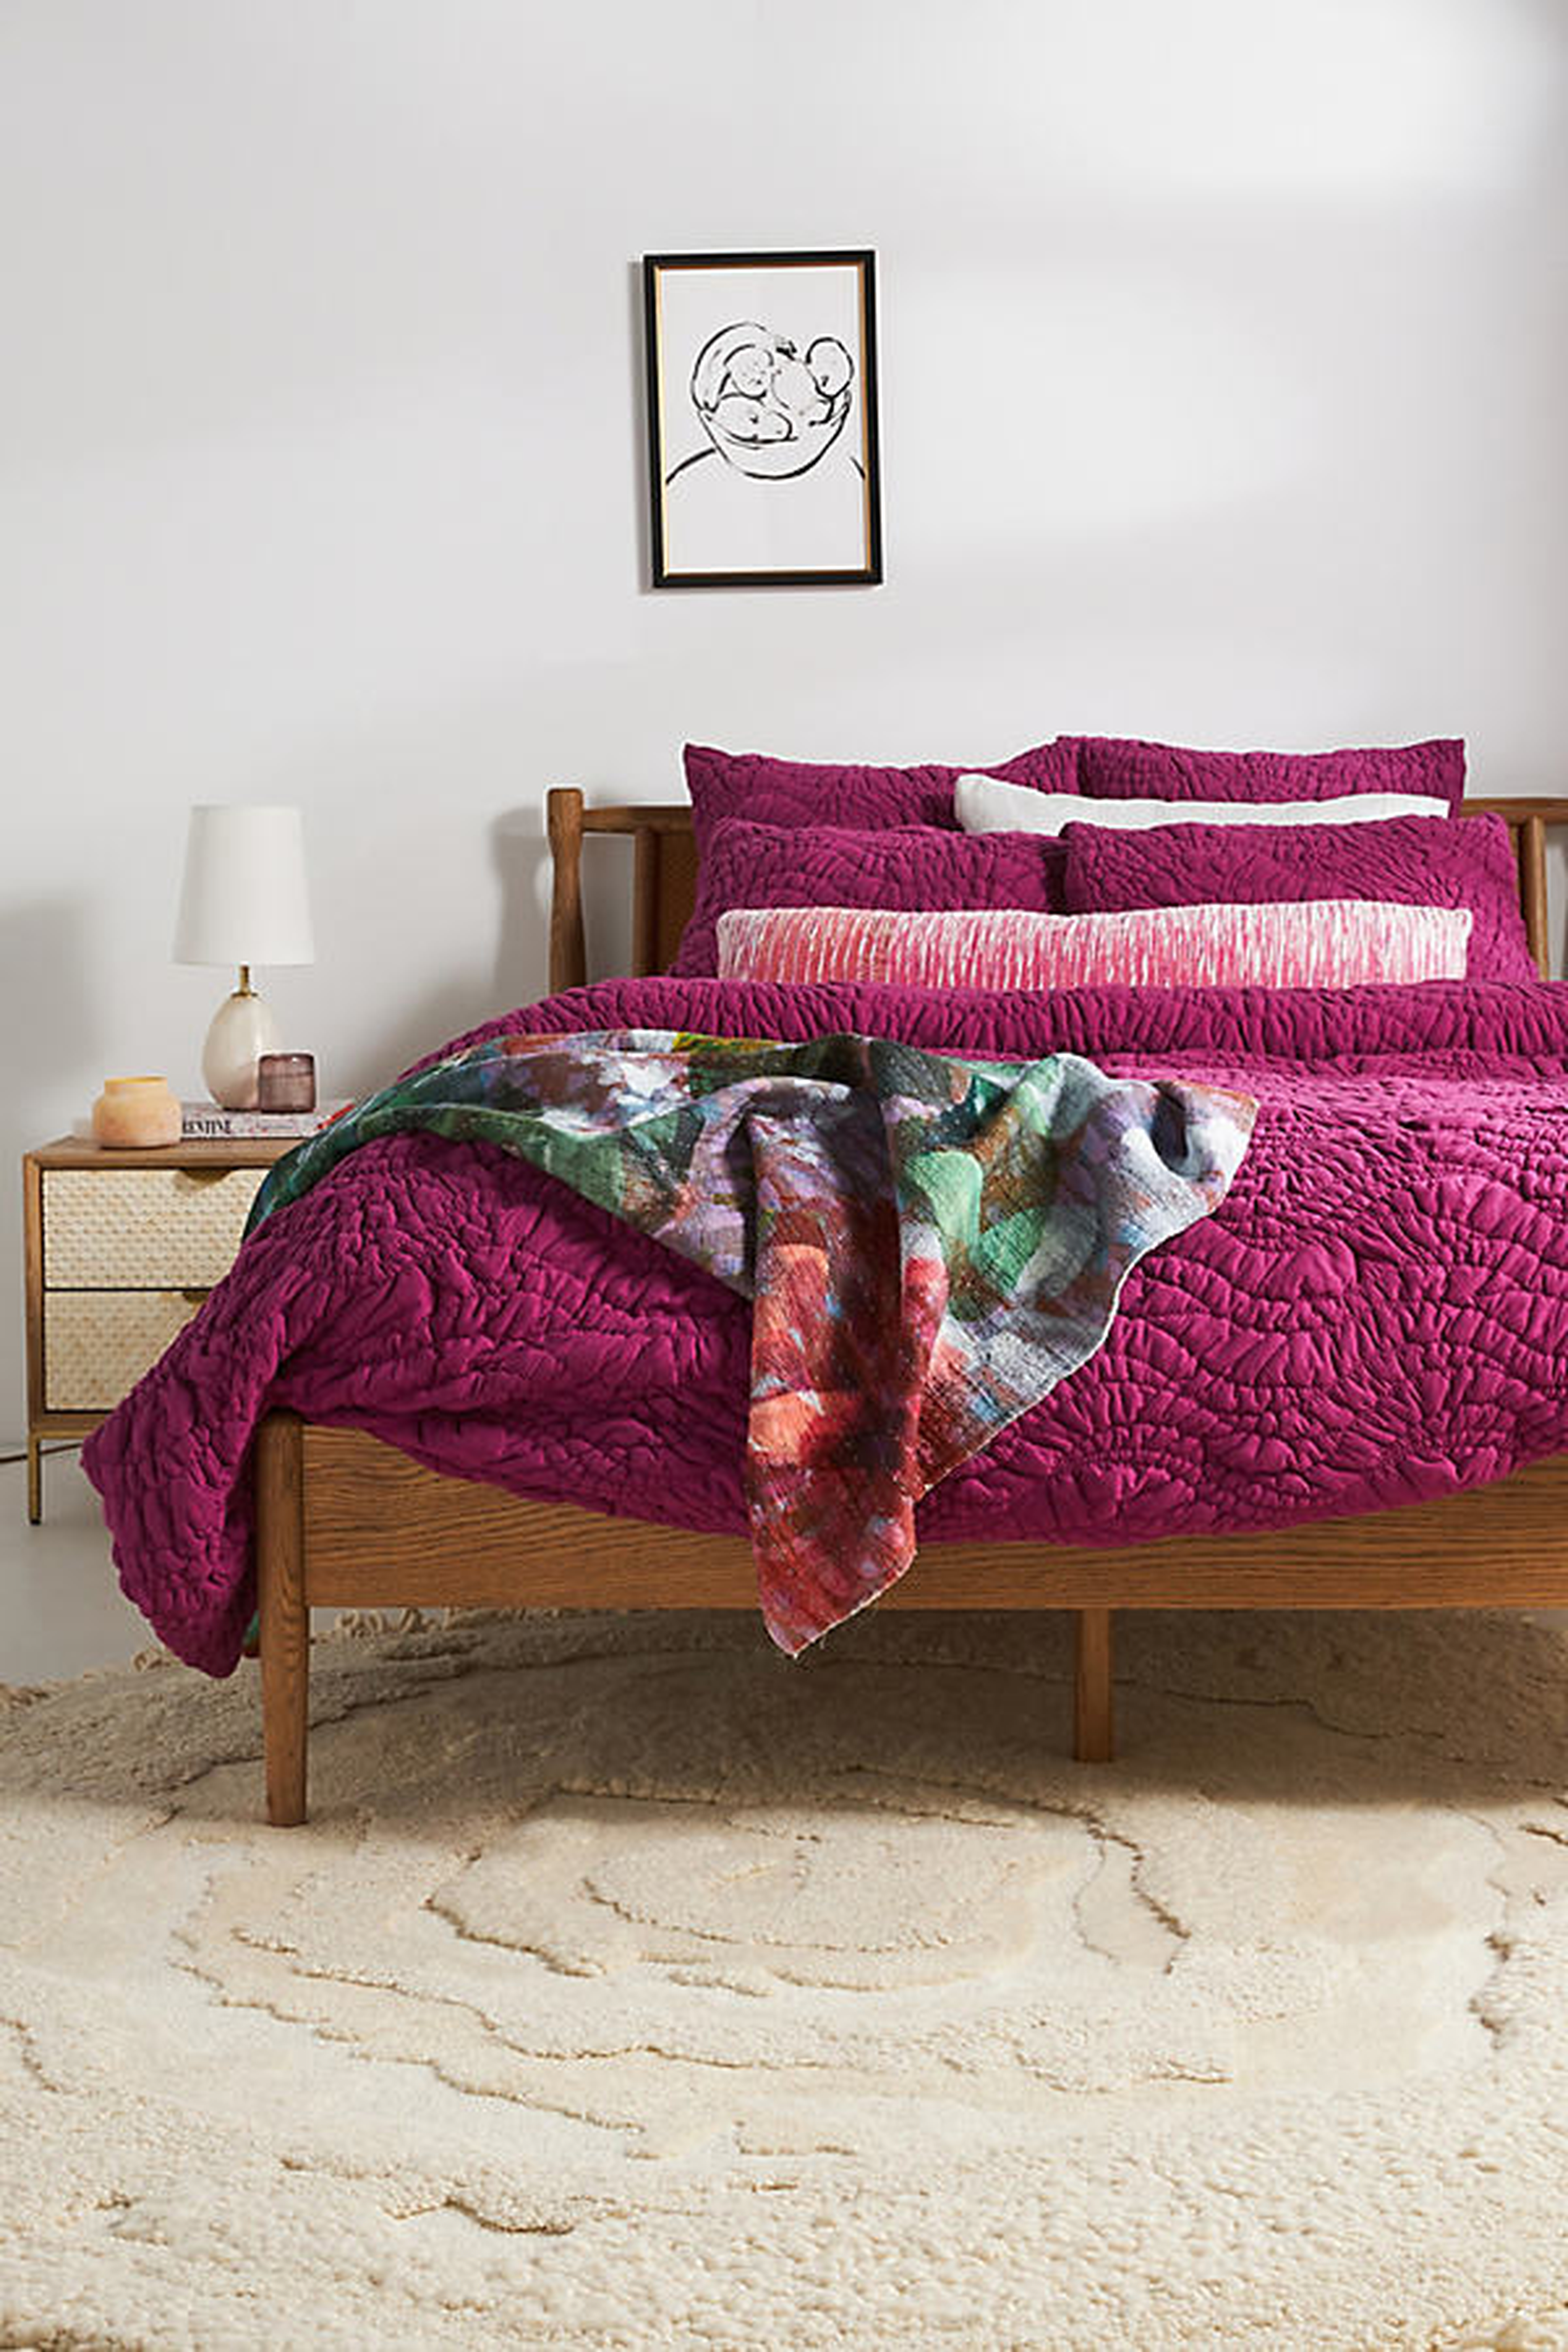 Bajada Jersey Quilt By Anthropologie in Purple Size KG TOP/BED - Anthropologie